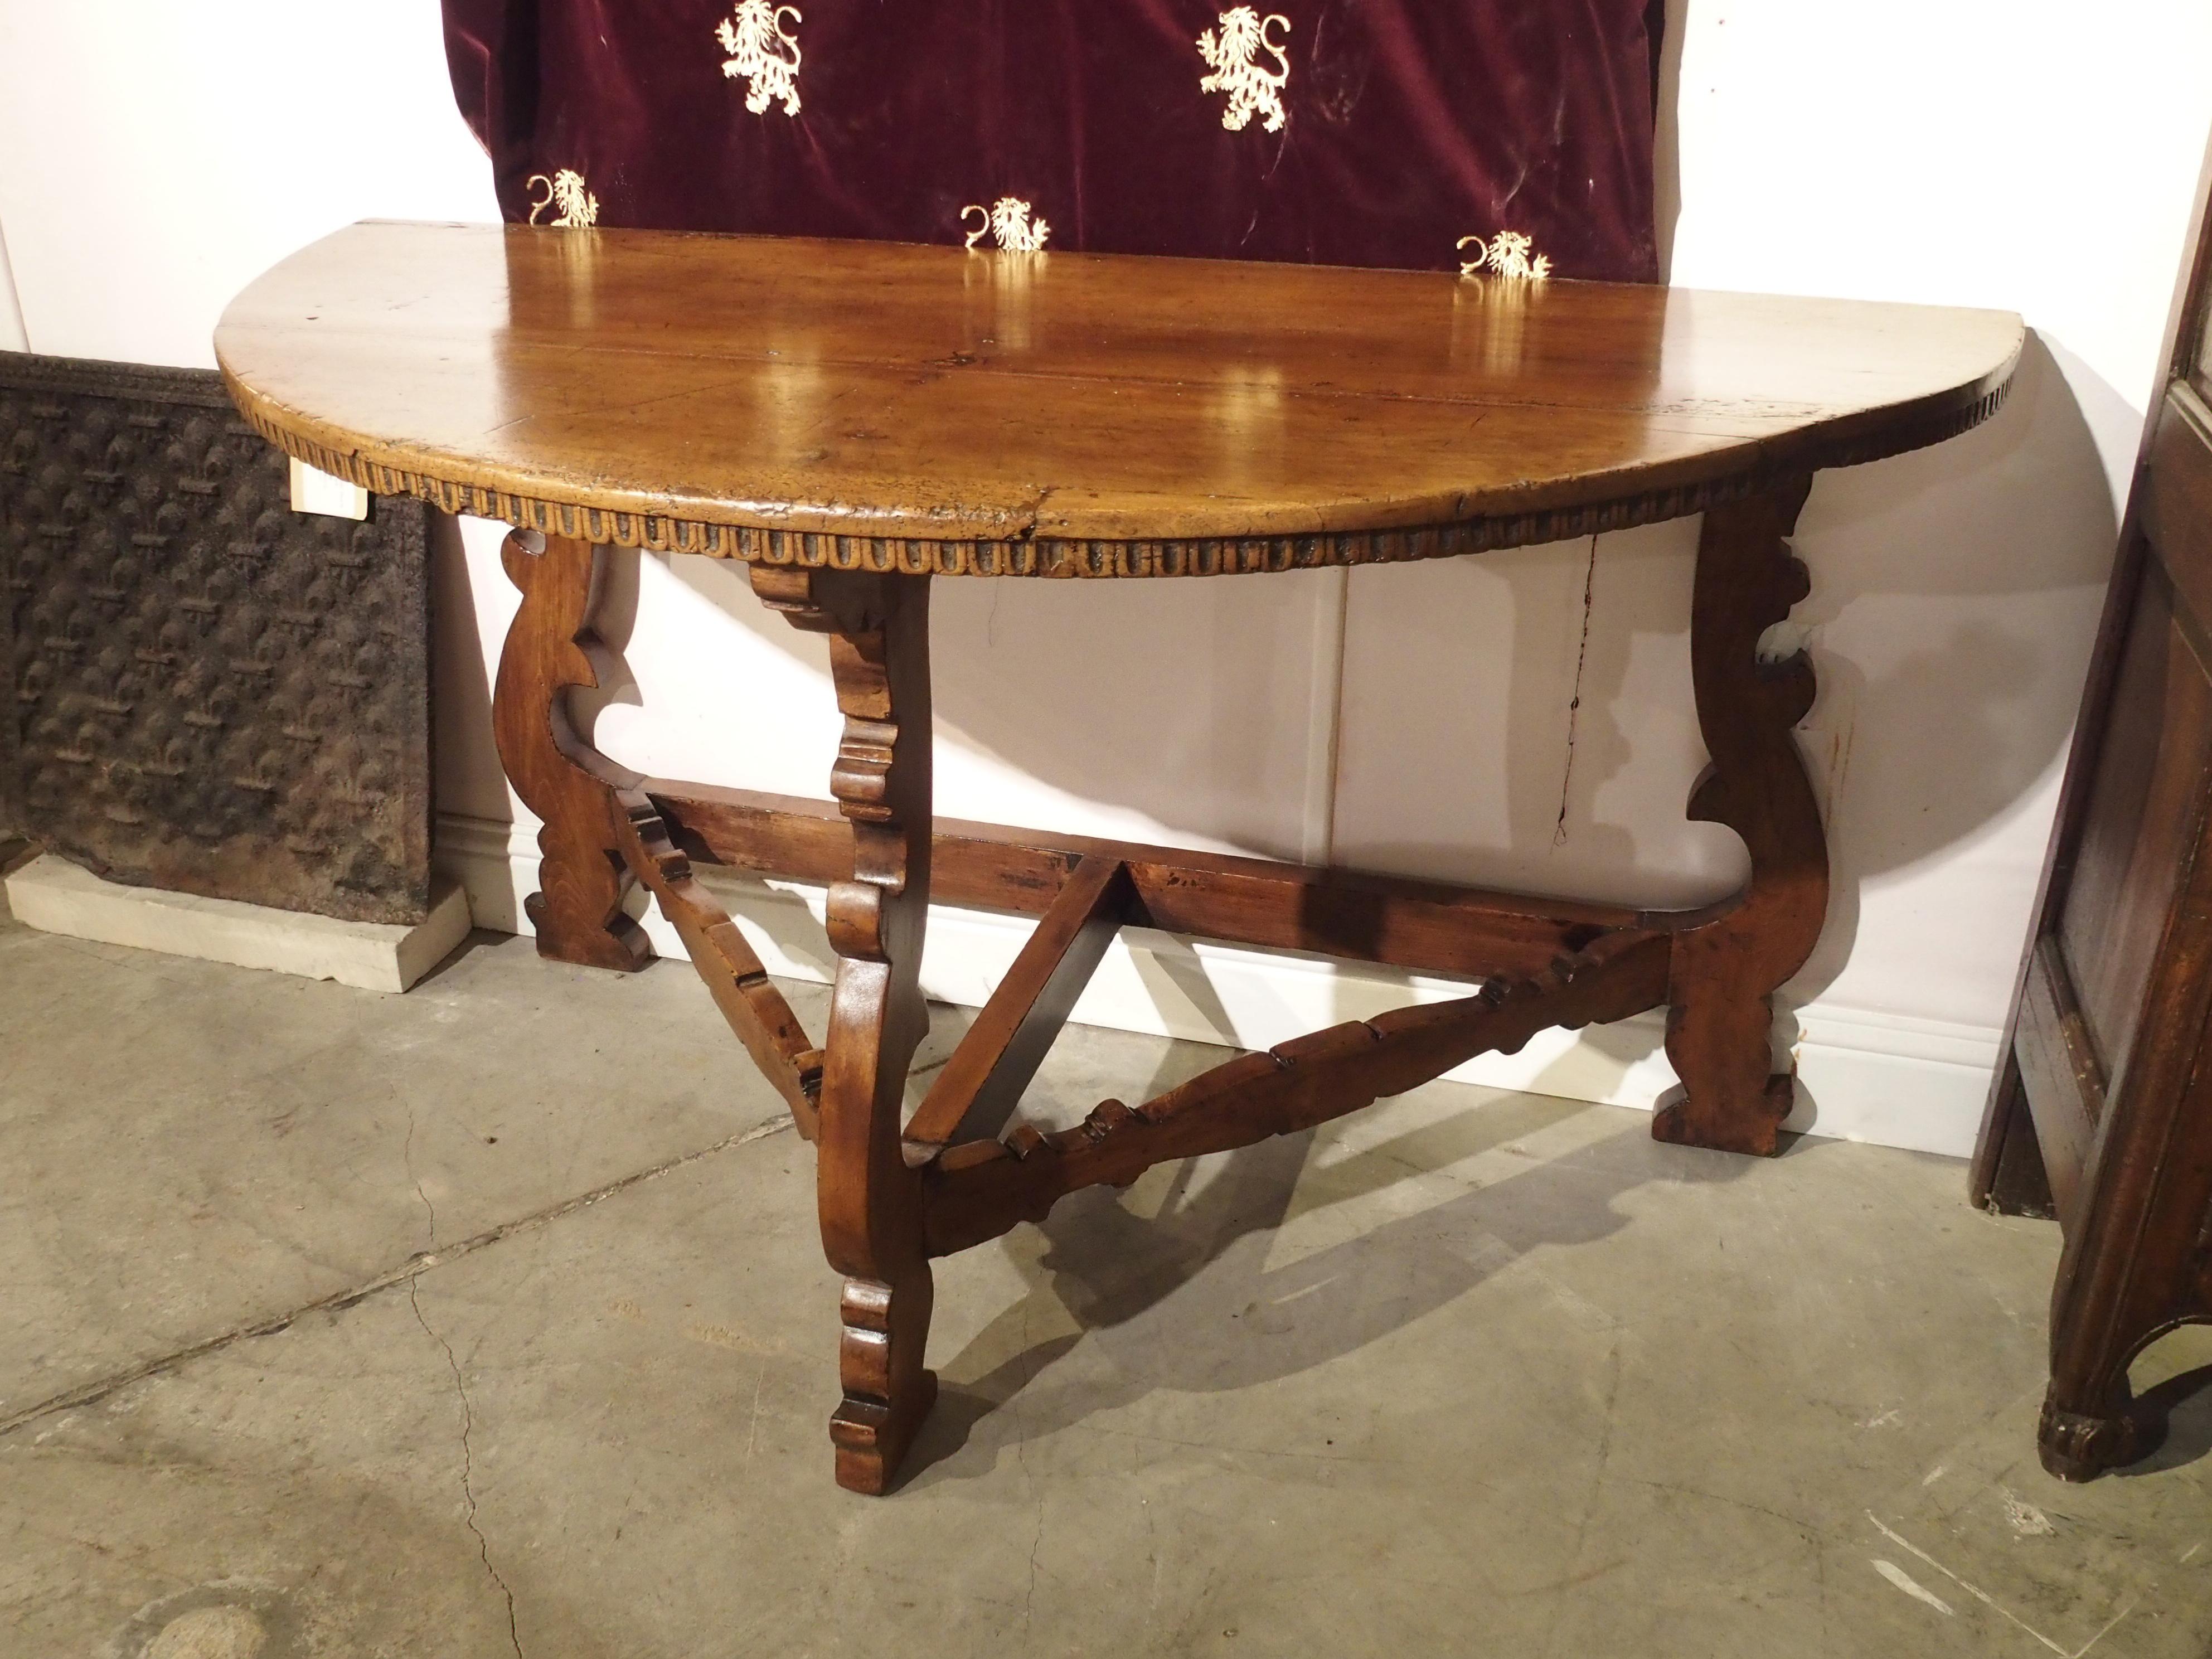 This half round table was made in Italy, in the early 1700s. Tables of this type were first constructed in the mid to late 1600s, heavily influenced by Spanish style. The linear scoop motif under the top is typically Italian, while the shaped lyre